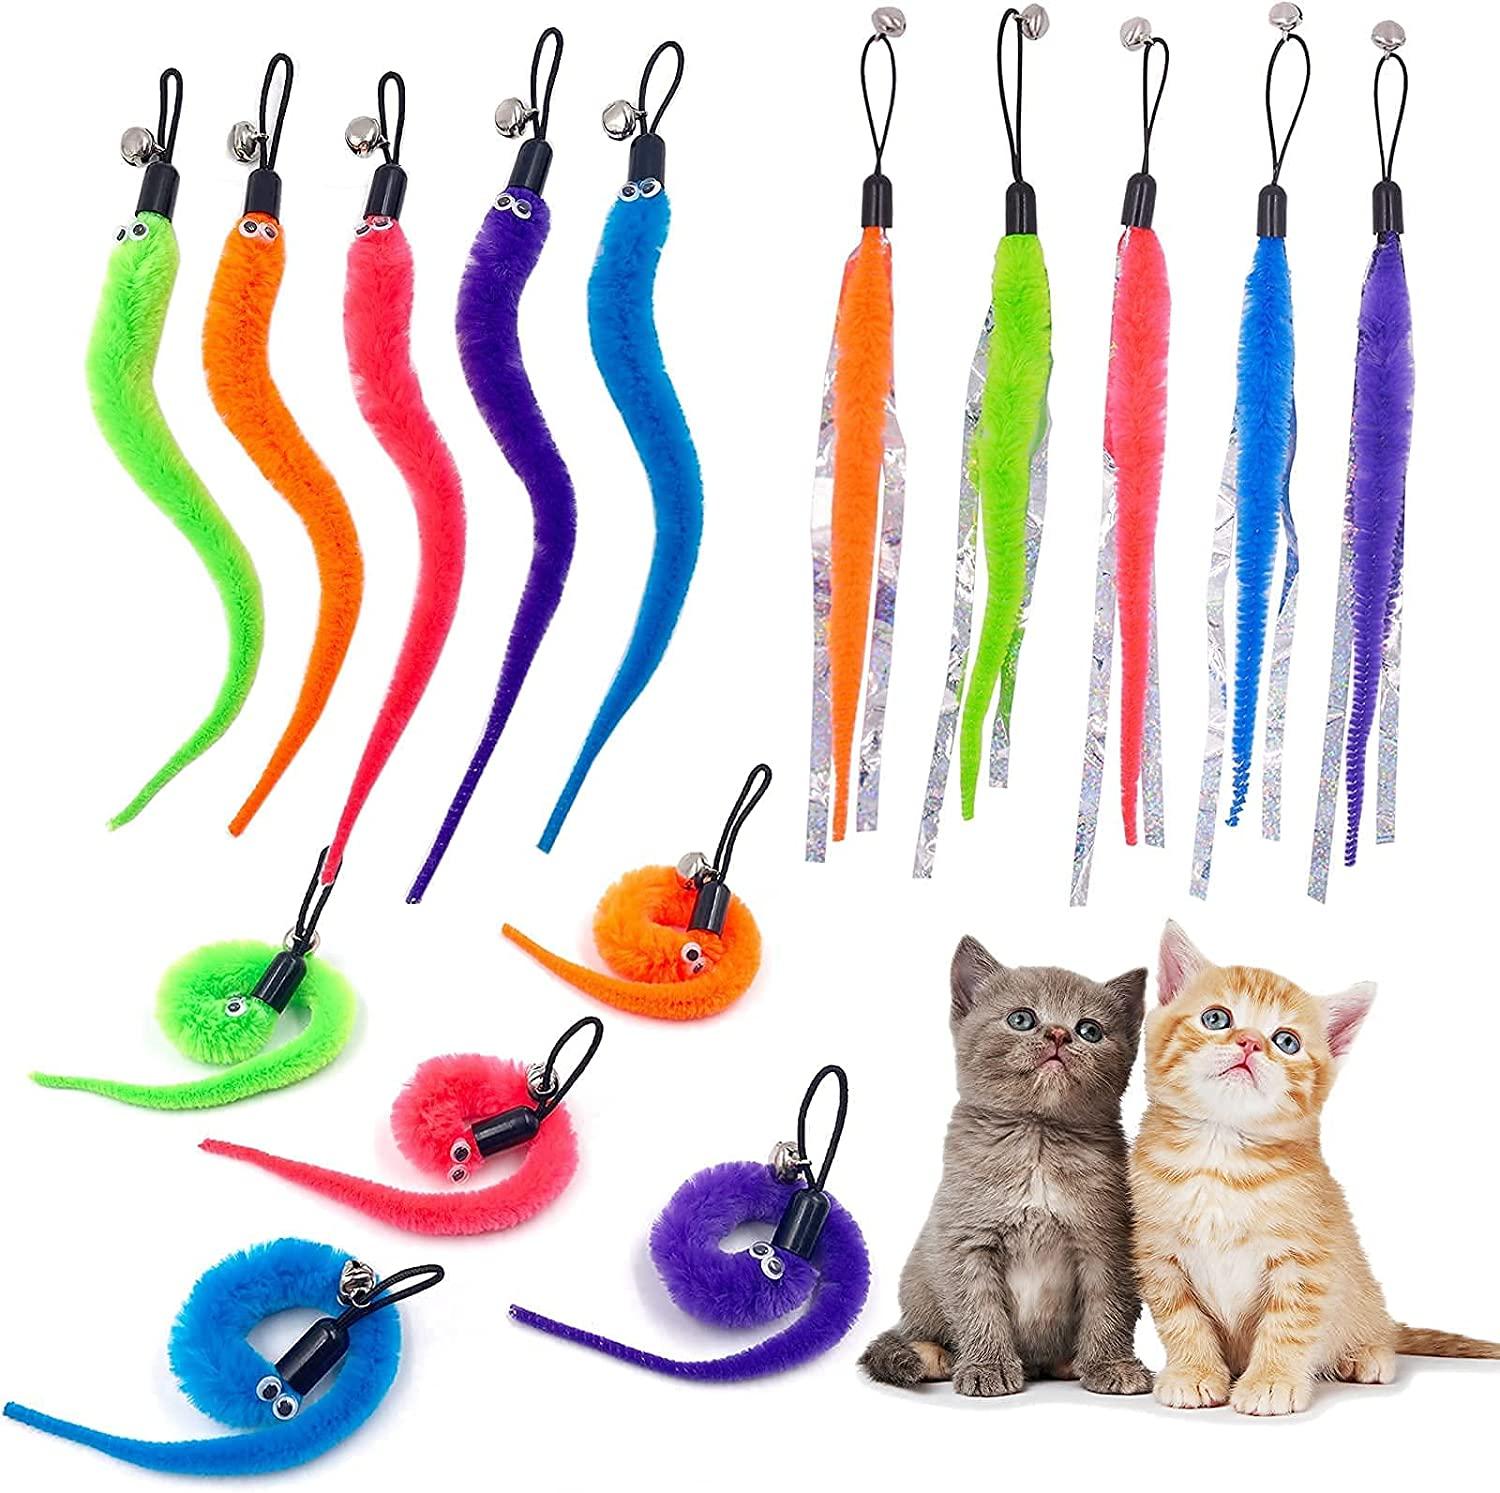 Cat Worm Toy Refills Cat Toy Wand Replacement, Cat Worms Refill, Worm  Teaser Refills for Cat Wand 15 PCS Worm Refills